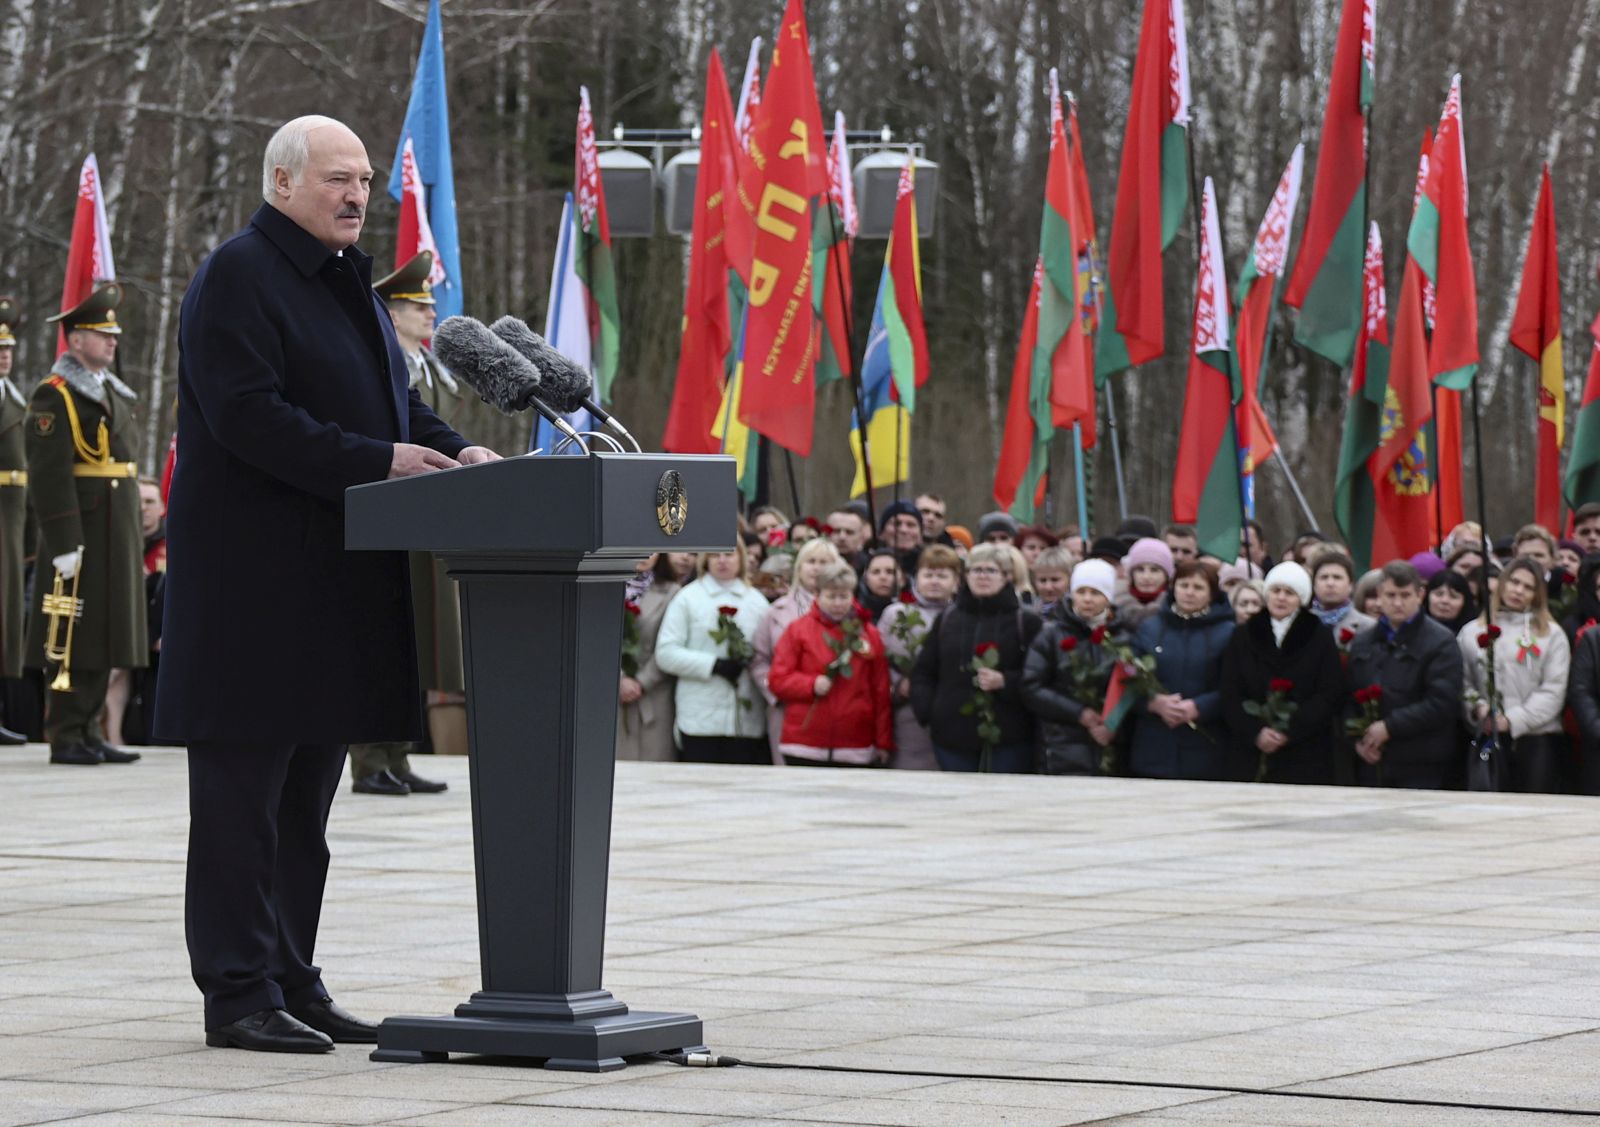 epa10536830 A handout photo made available by the Belarus Presidential Press Service shows Belarusian President Alexander Lukashenko delivering a speech during a ceremony to mark the 80th anniversary of the Khatyn Massacre, at the Eternal Flame at the Khatyn Memorial Complex in Khatyn, Belarus, 22 March 2023. On 22 March 1943, in retaliation for an attack by Soviet partisans, Nazi Germany’s troops gathered 149 Khatyn residents, including 75 children, into a barn and set it on fire before proceeding to destroy the whole village and shooting those who managed to escape the fire.  EPA/BELARUS PRESIDENT PRESS SERVICE /HANDOUT  HANDOUT EDITORIAL USE ONLY/NO SALES